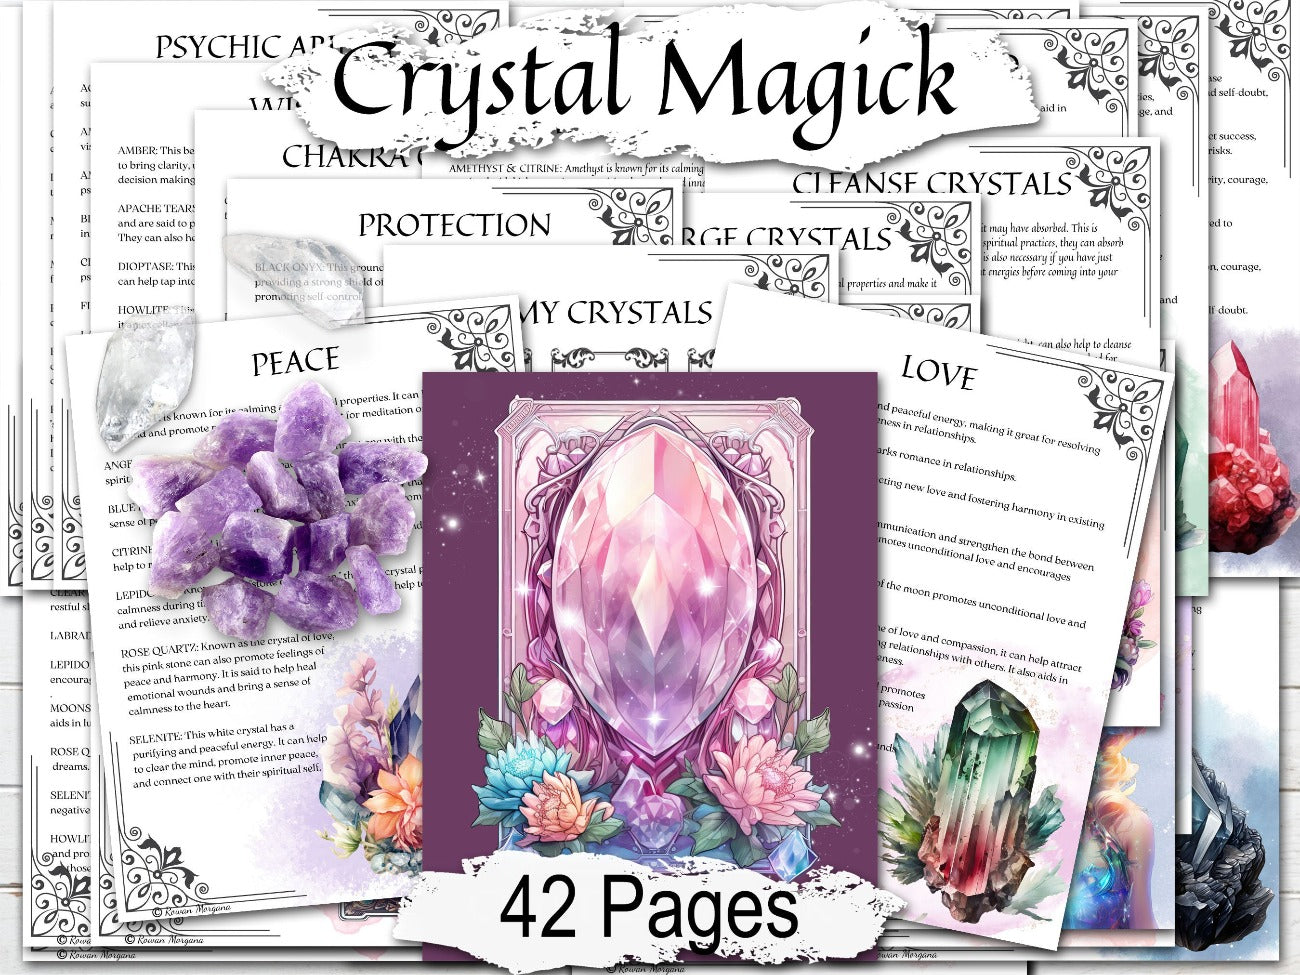 CRYSTAL MAGICK, 42 pgs, Printable crystal meanings & guide for the stone witch, cleansing and charging, choose stones by magic intention - Morgana Magick Spell